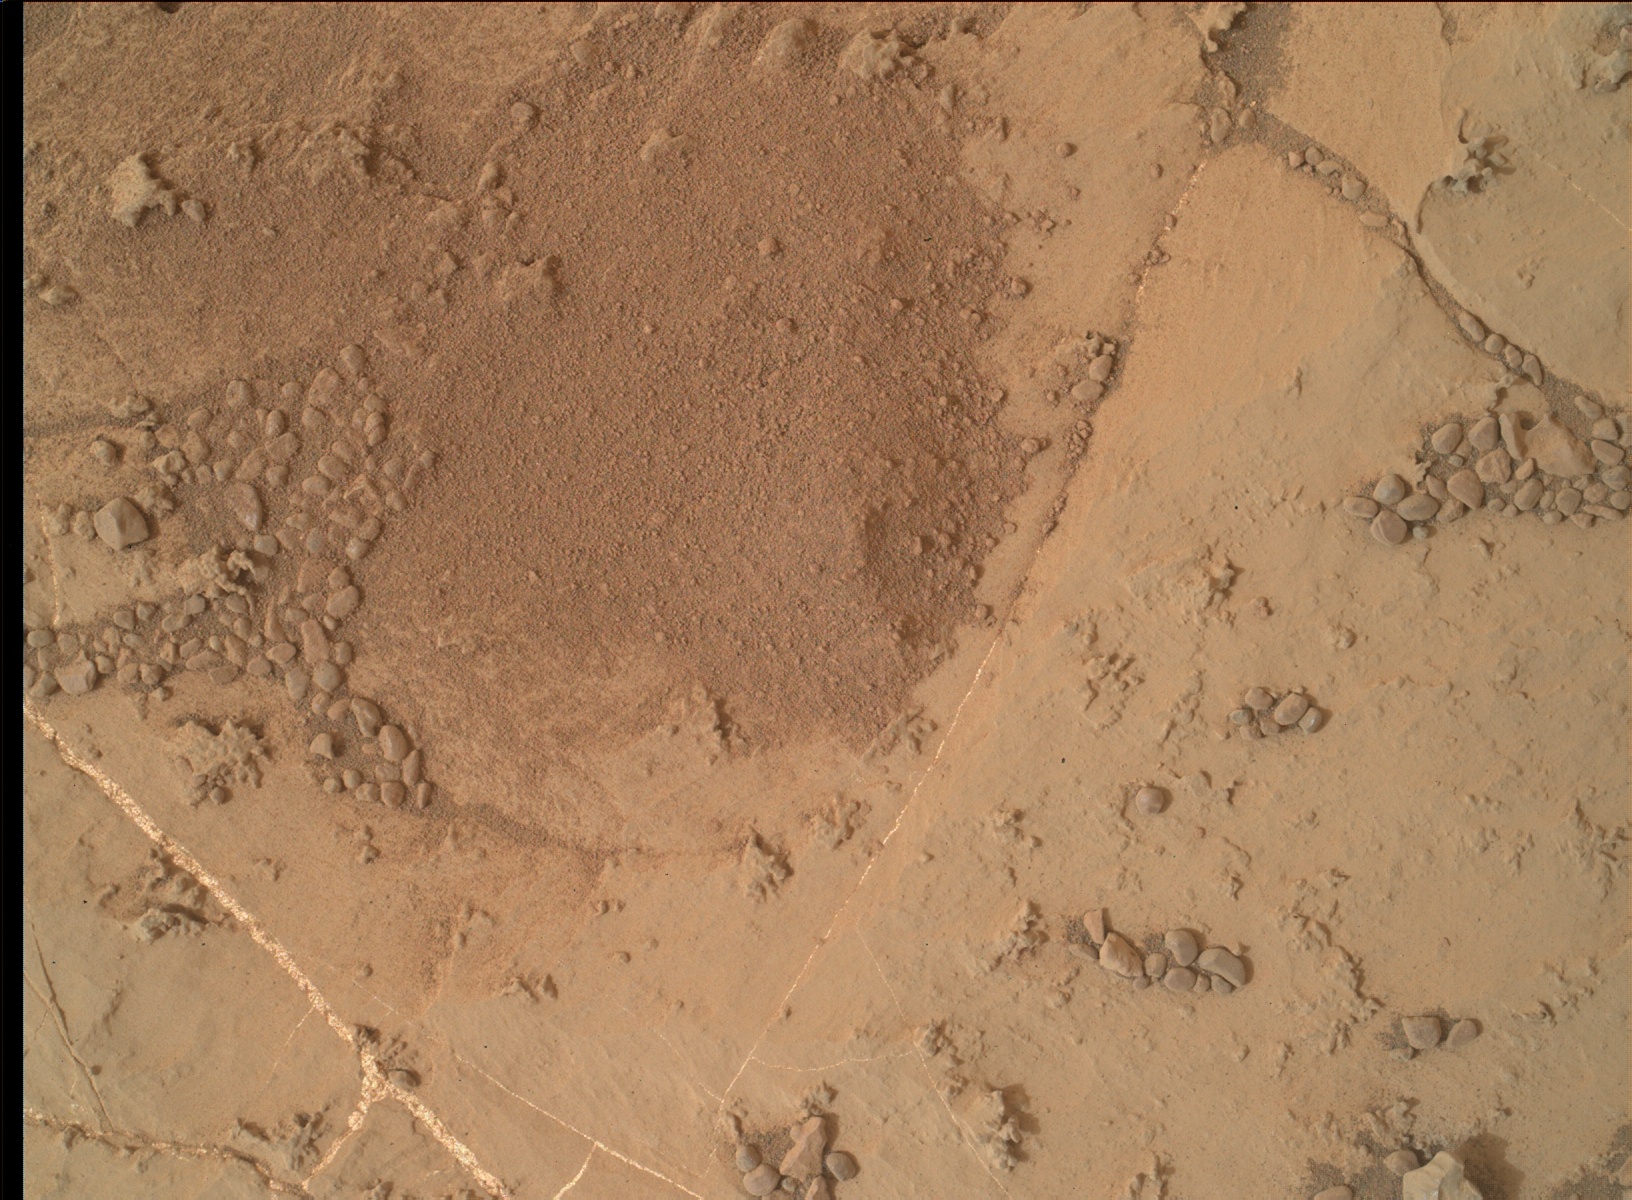 Nasa's Mars rover Curiosity acquired this image using its Mars Hand Lens Imager (MAHLI) on Sol 2155